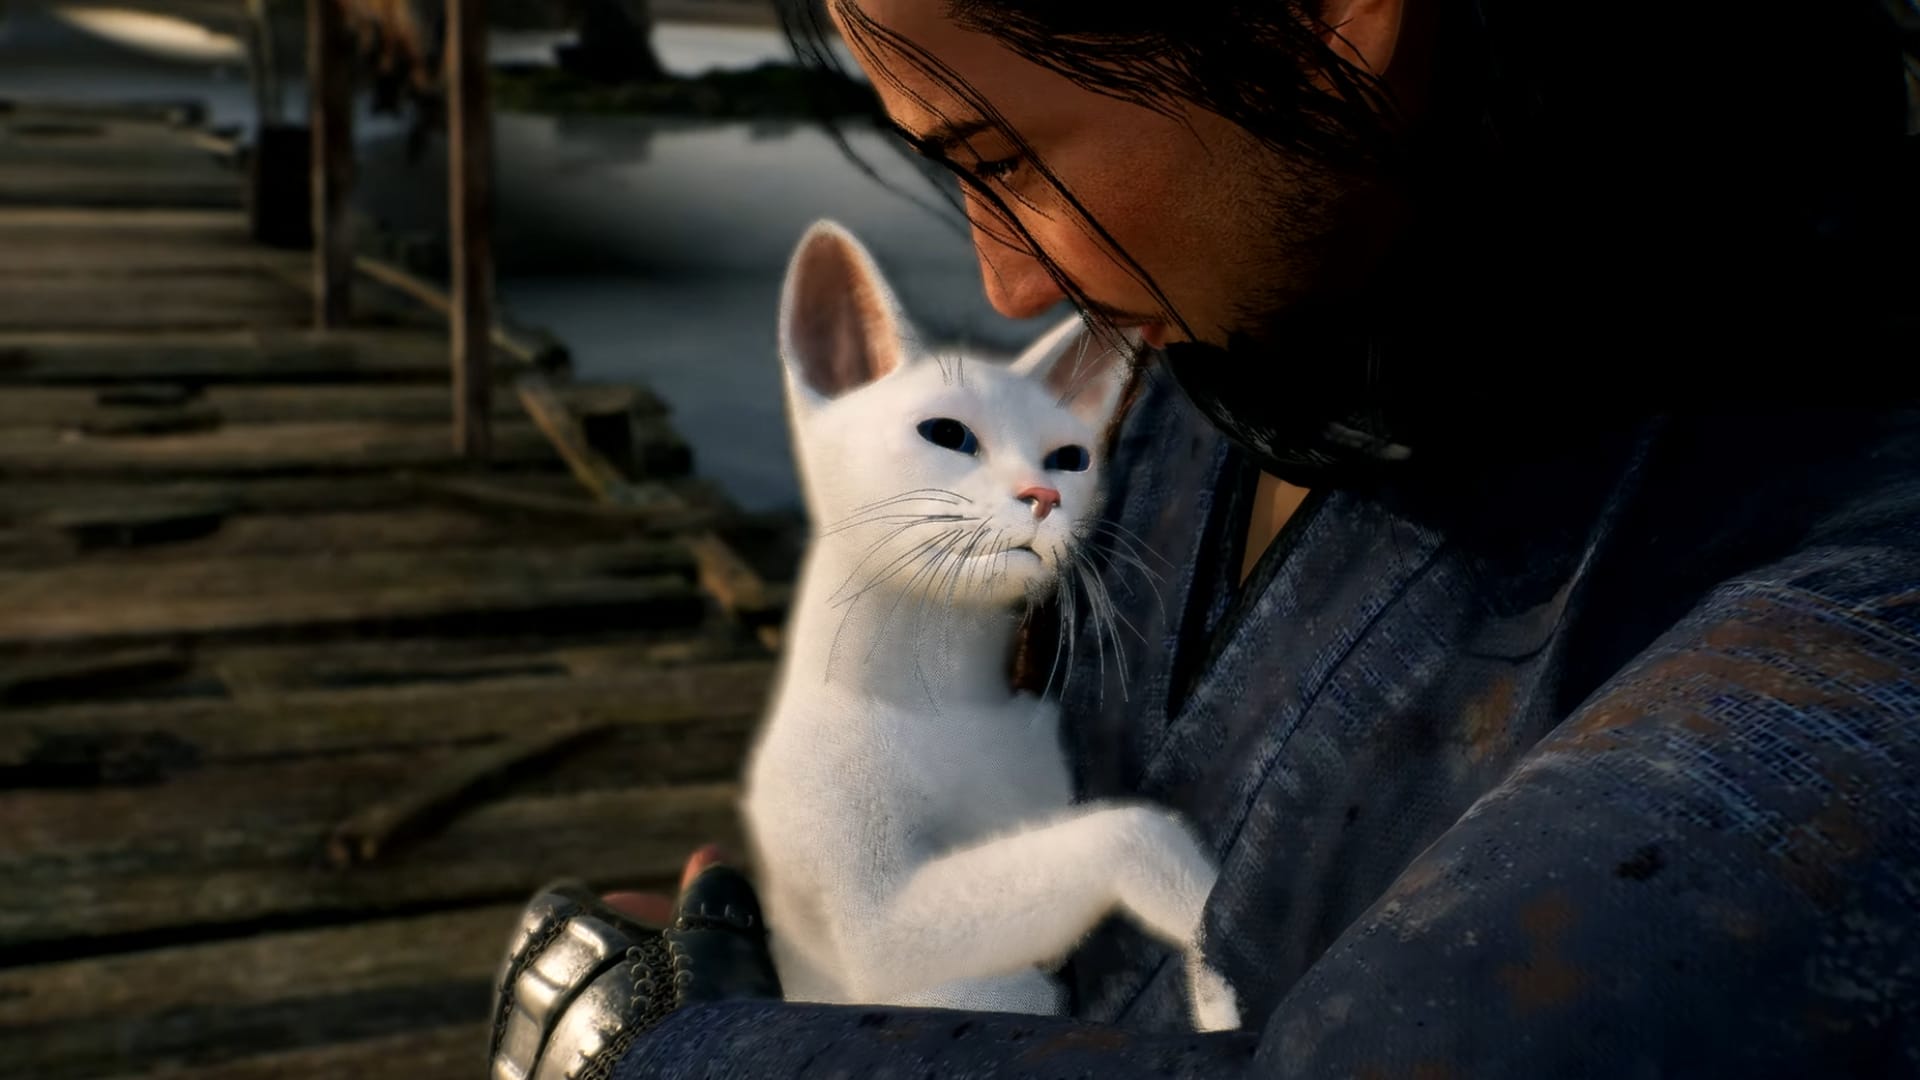 Rise of the Ronin New Trailer Showcases Gorgeous Landscapes and Cats - MP1st